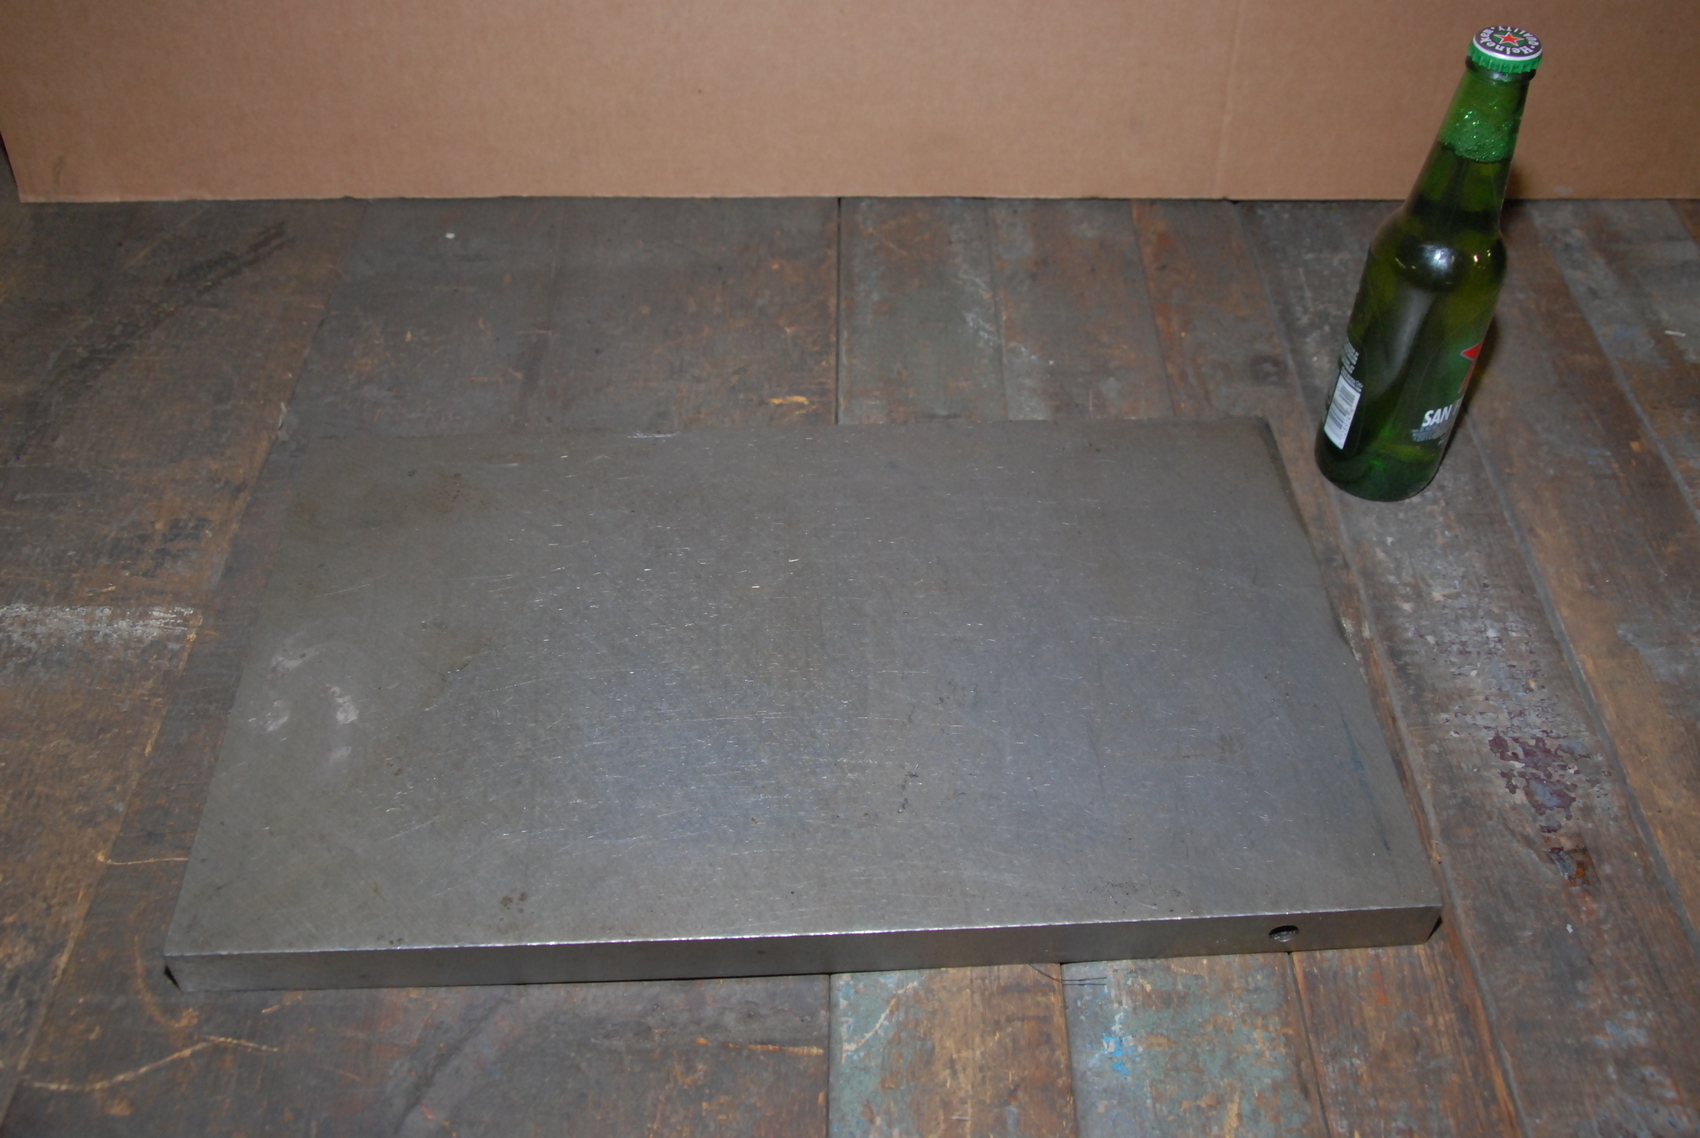 ONE steel Plate for blacksmith anvil,56 lbs;18 x 11 x 1"